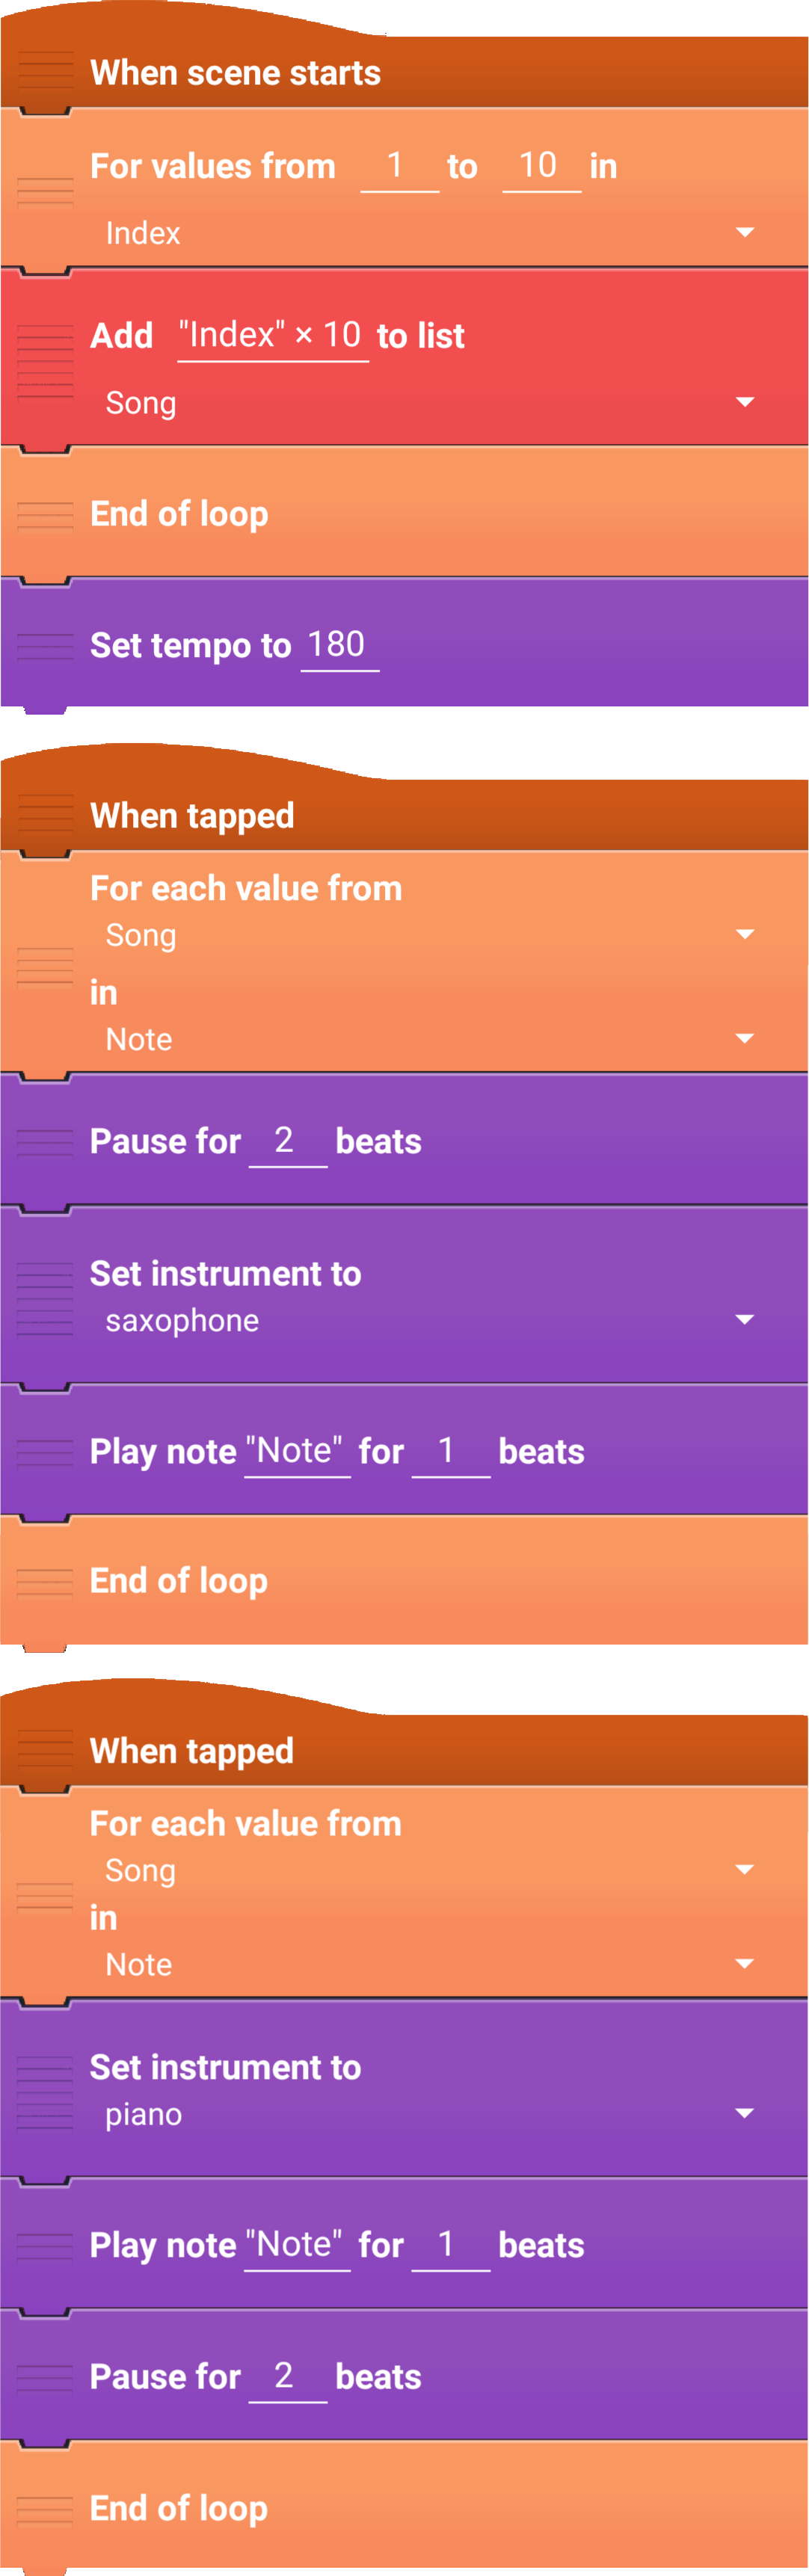 Set_Instrument_to_example.png